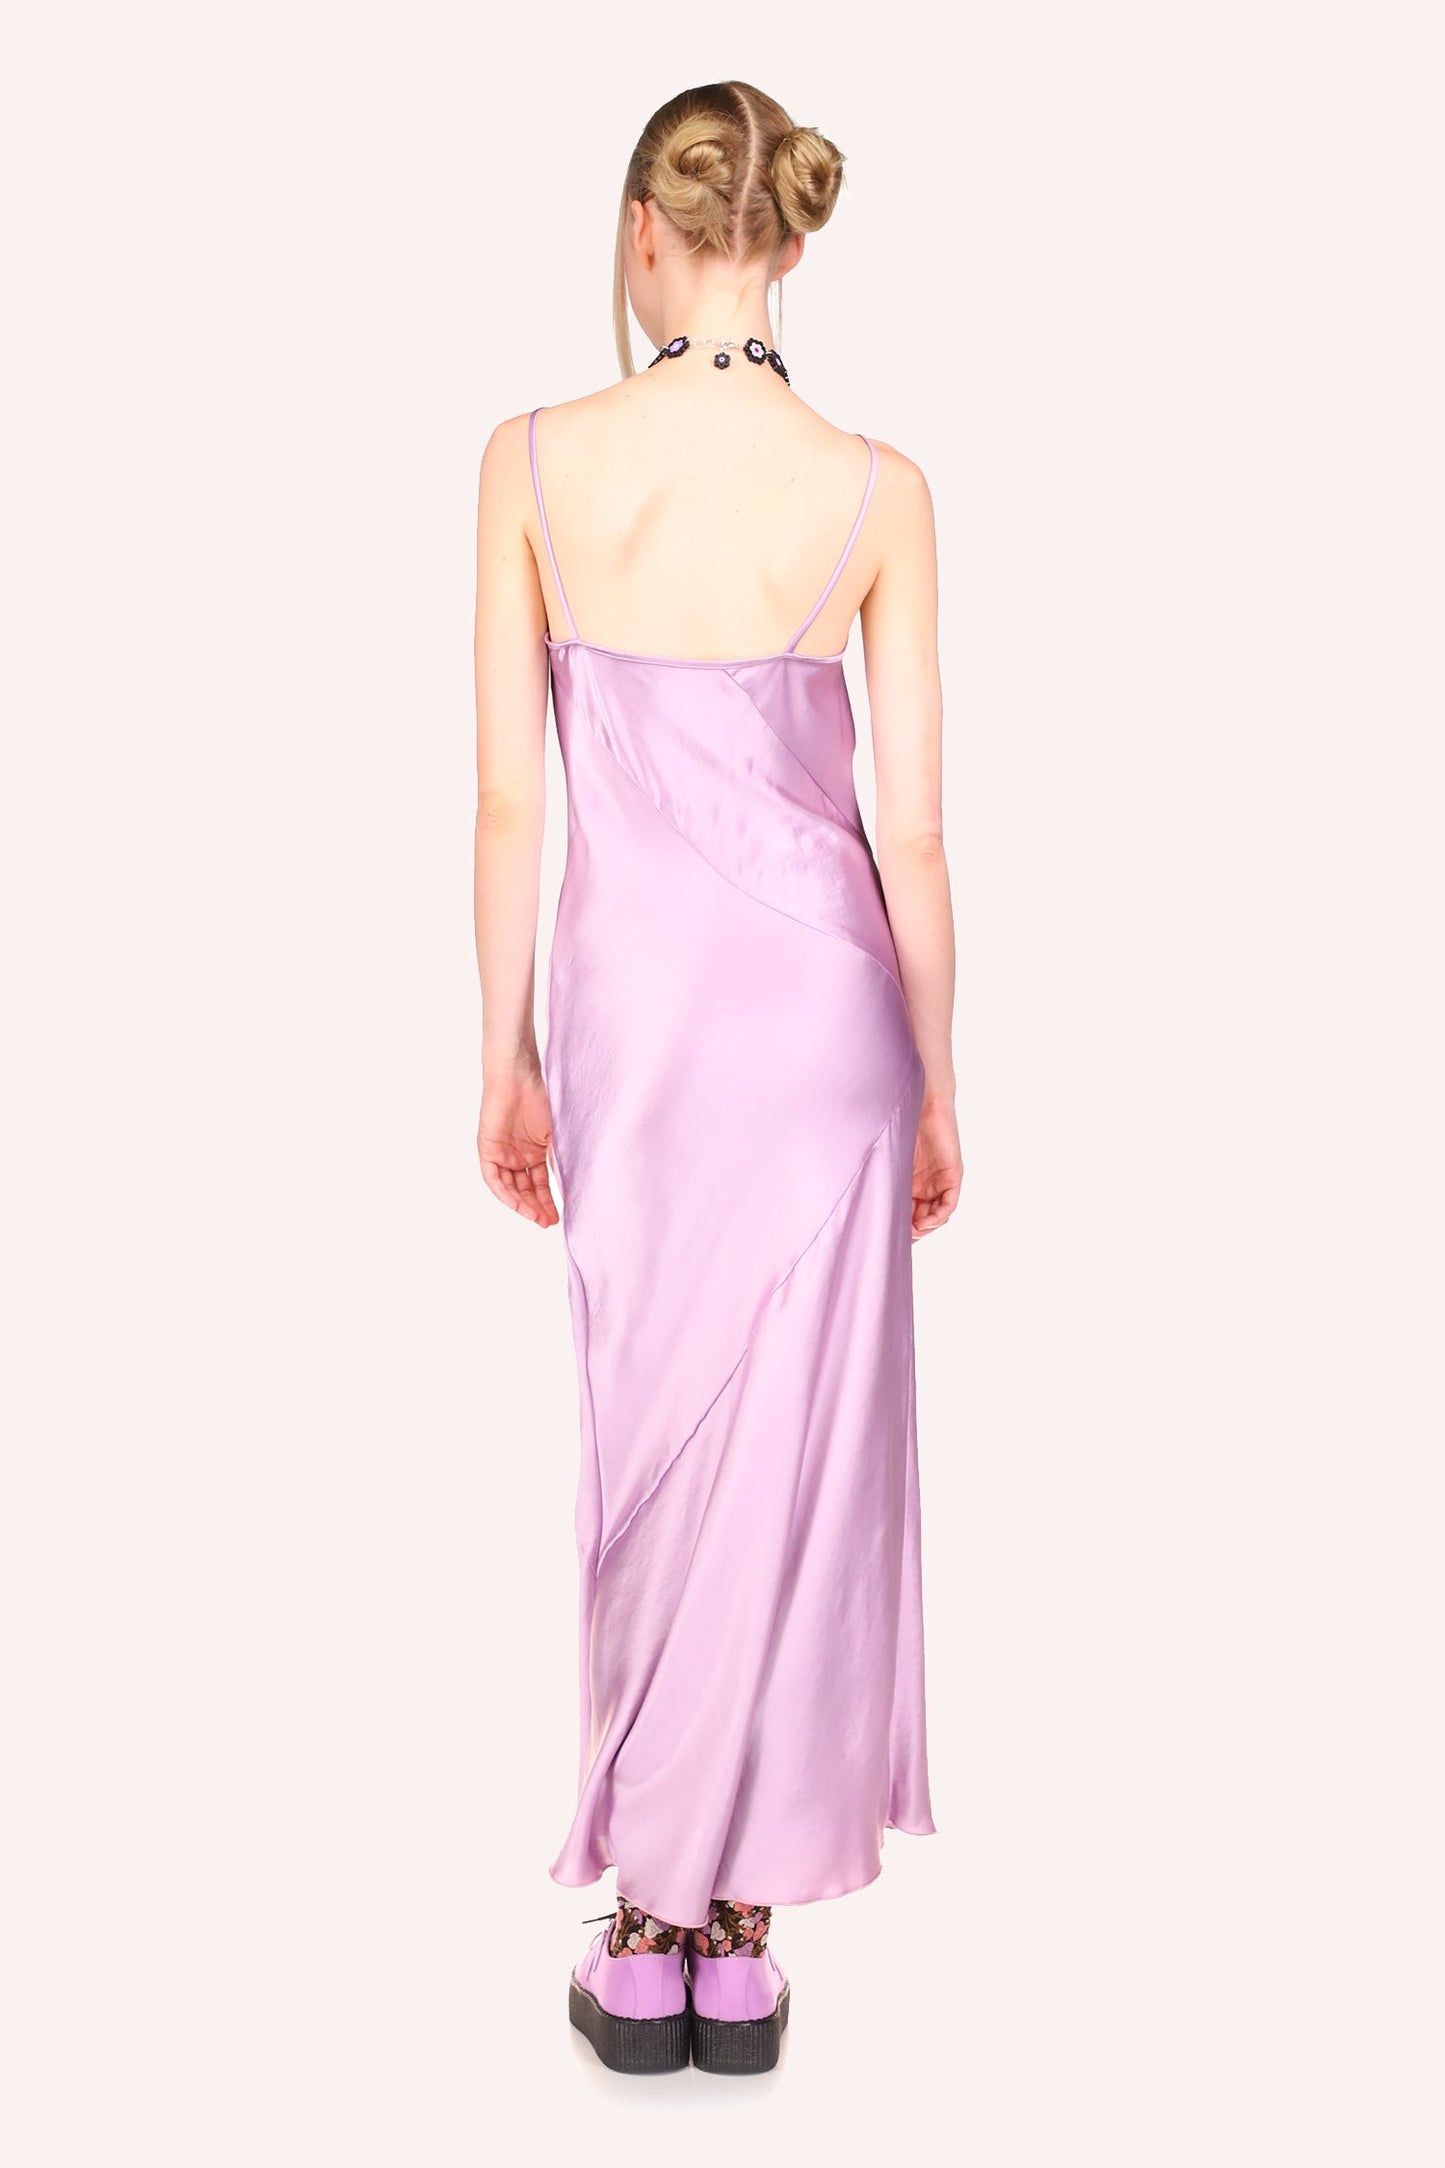 Satin Slip Dress lavender, round collar cut front and back, two diagonal stripes from left to right